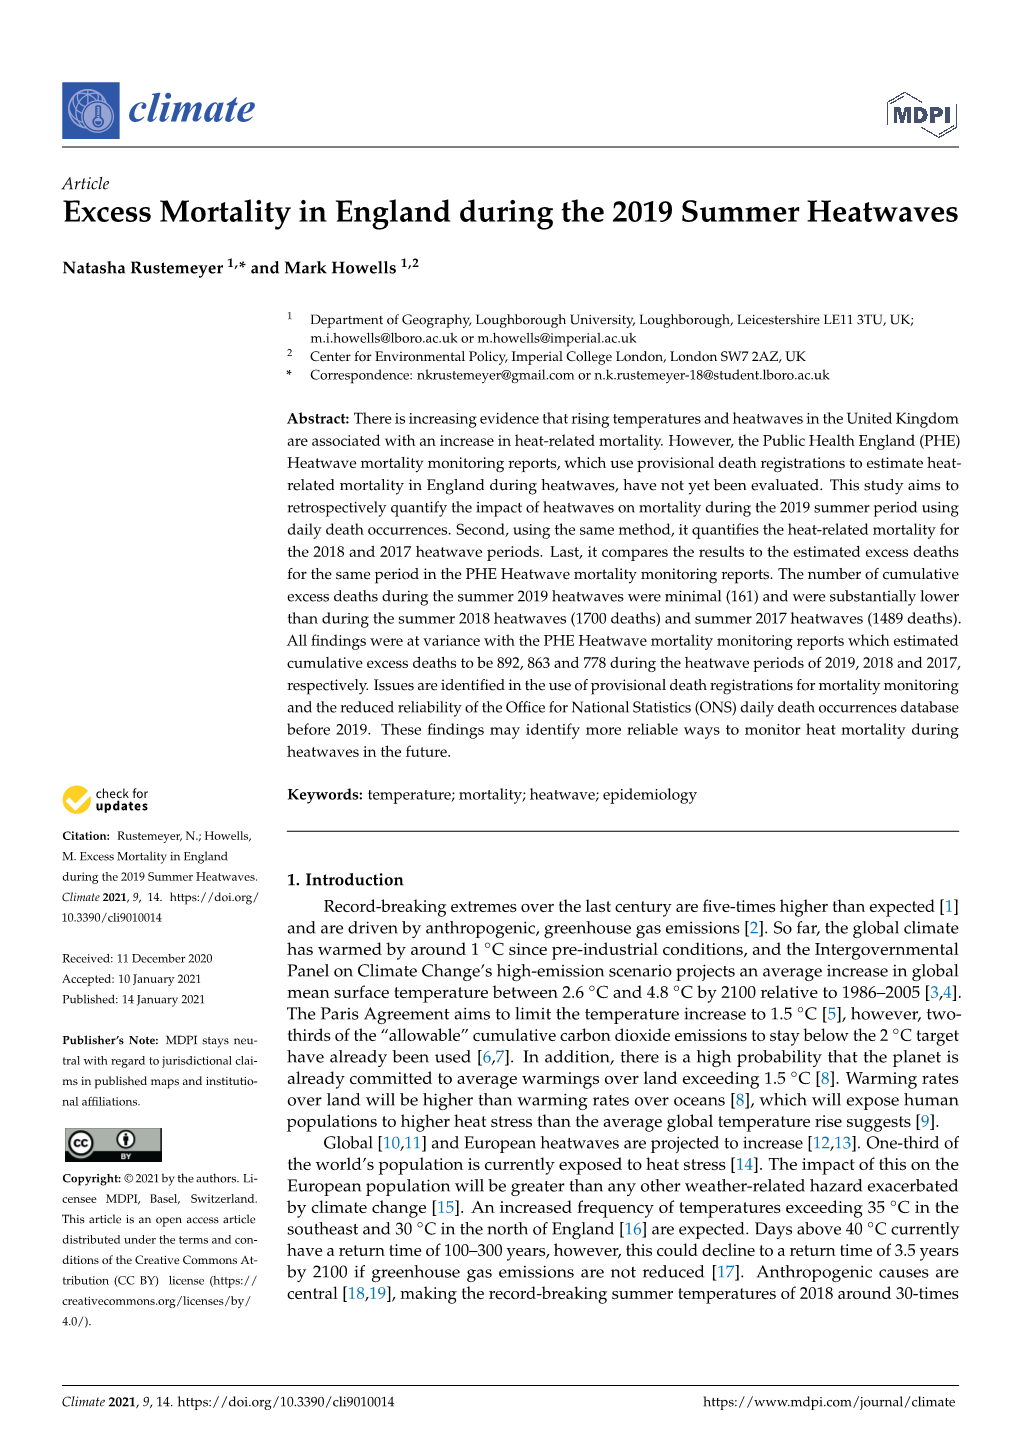 Excess Mortality in England During the 2019 Summer Heatwaves